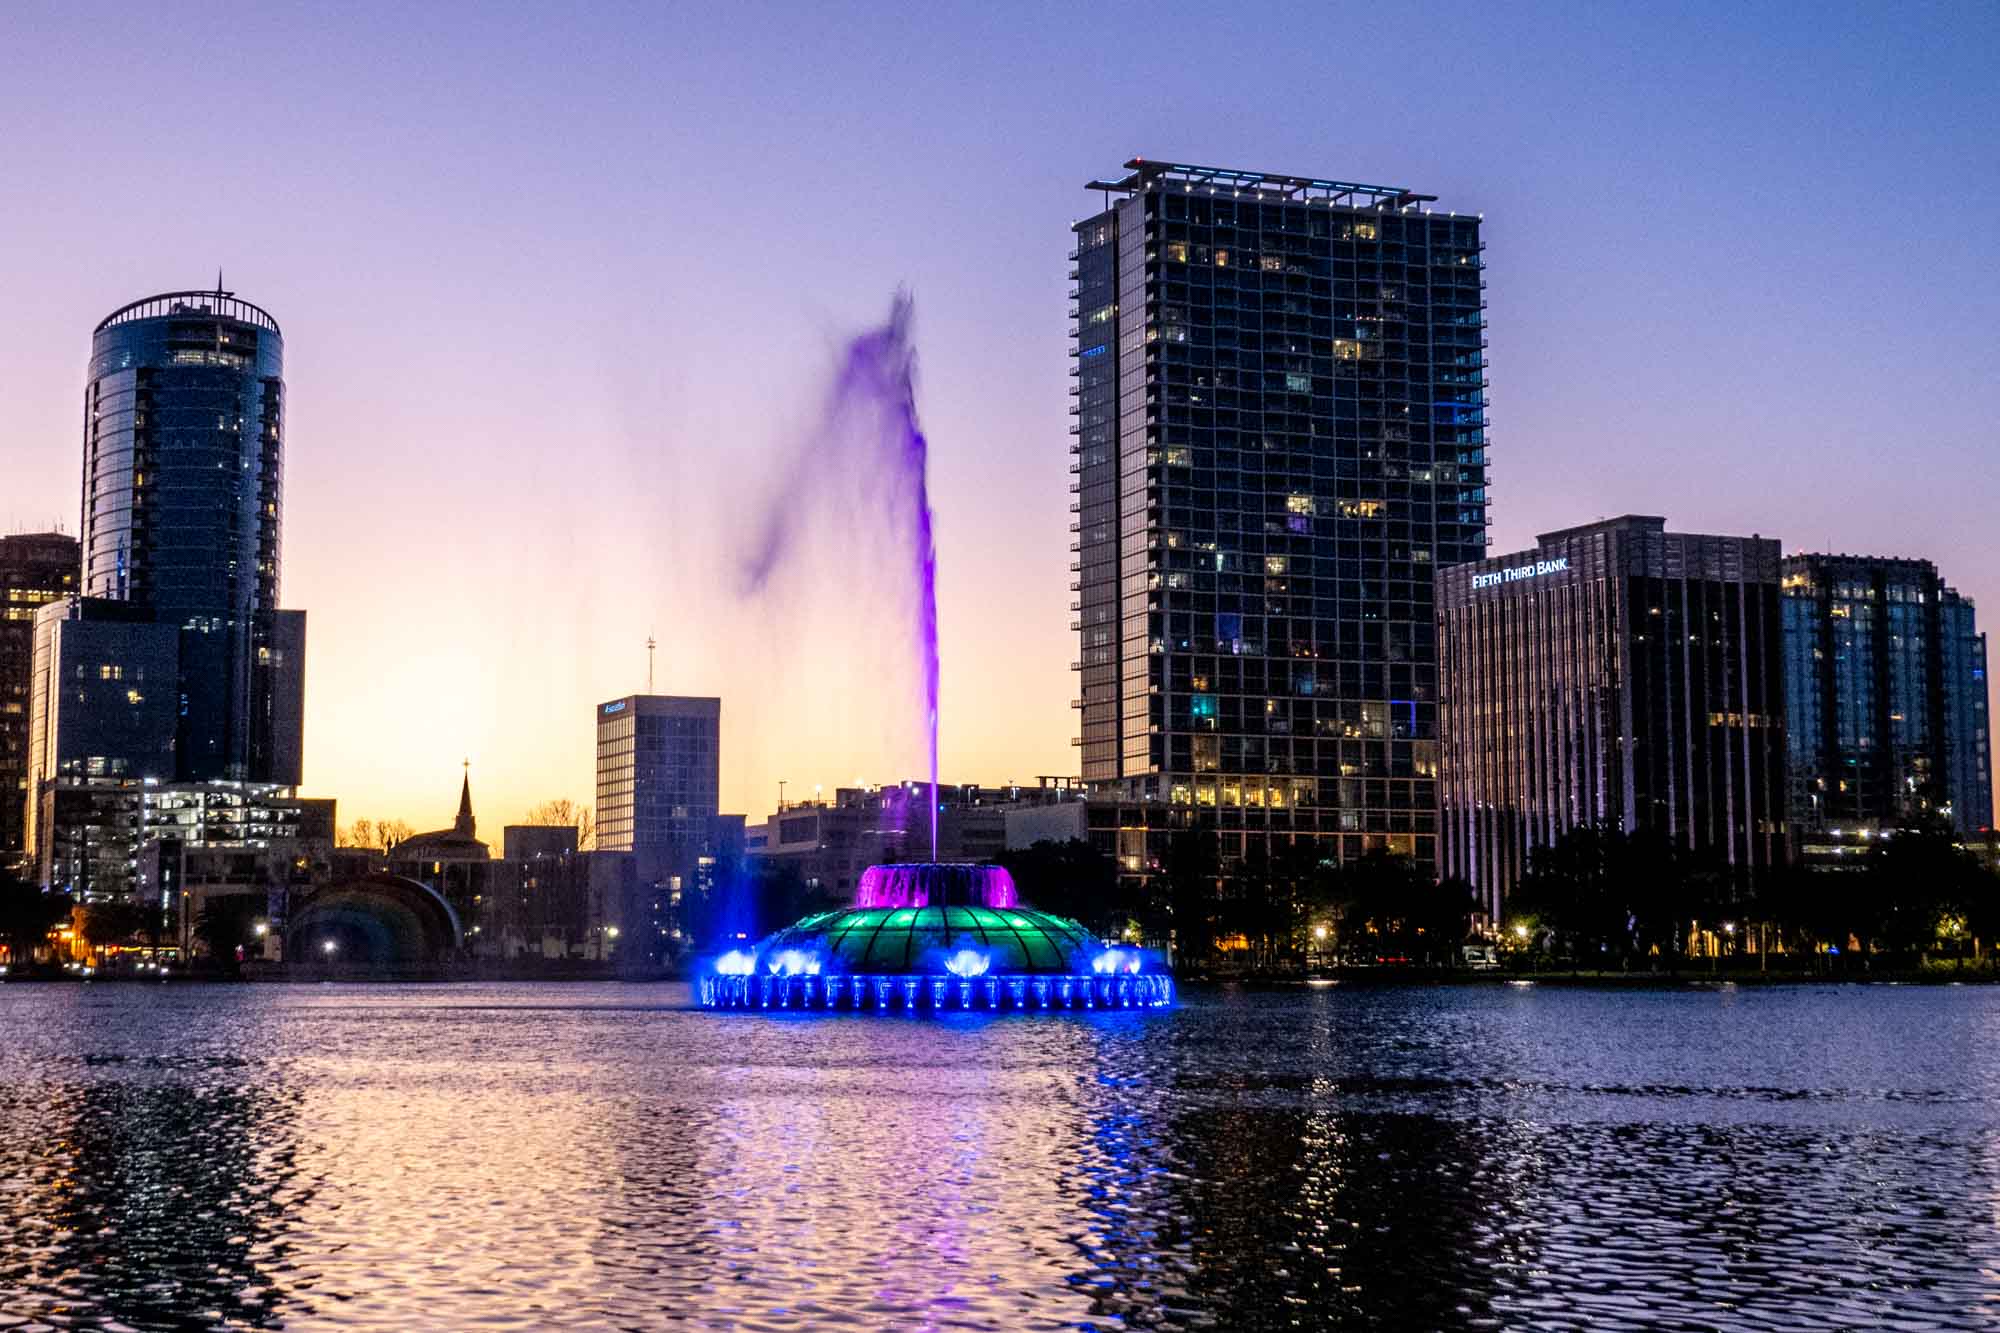 Fountain lit up in bright colors in the middle of a lake with skyscrapers in the background.